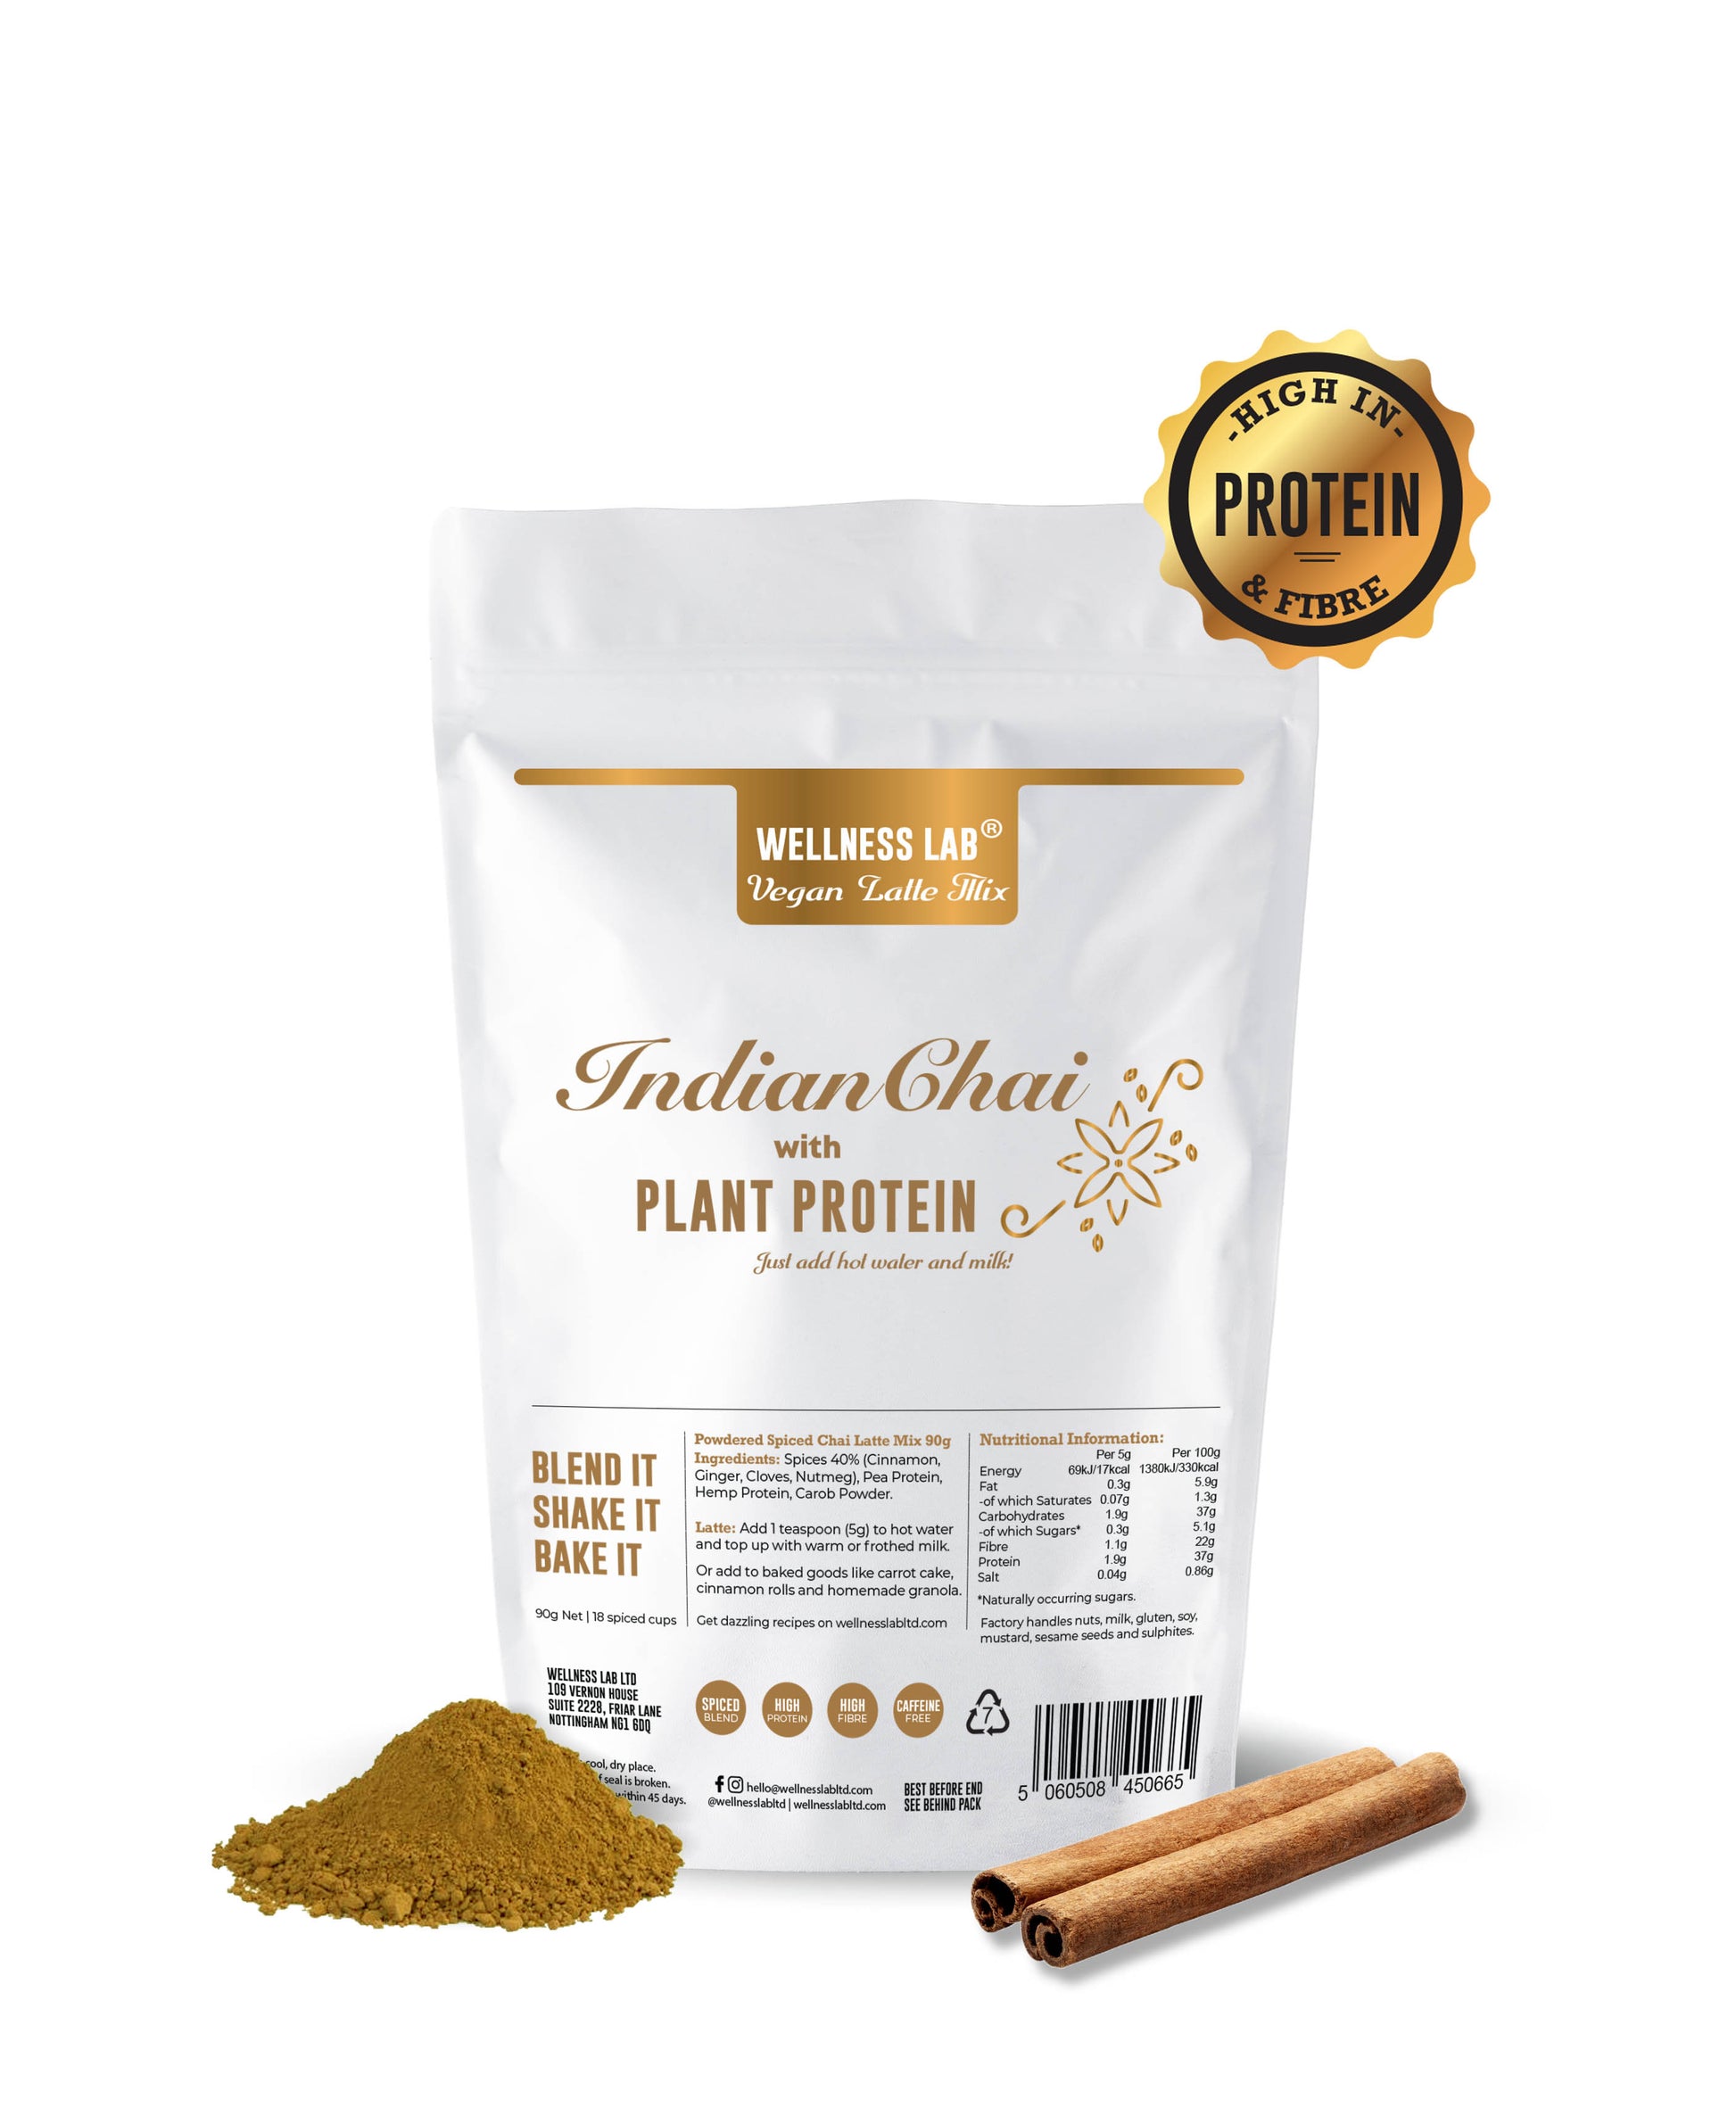 Franzese Spiced Chai Latte Mix | Gourmet Masala Spiced Chai Powder  w/Natural Spices (Delicious Instant Latte for Hot, Iced or Blended |  Arrives in 1